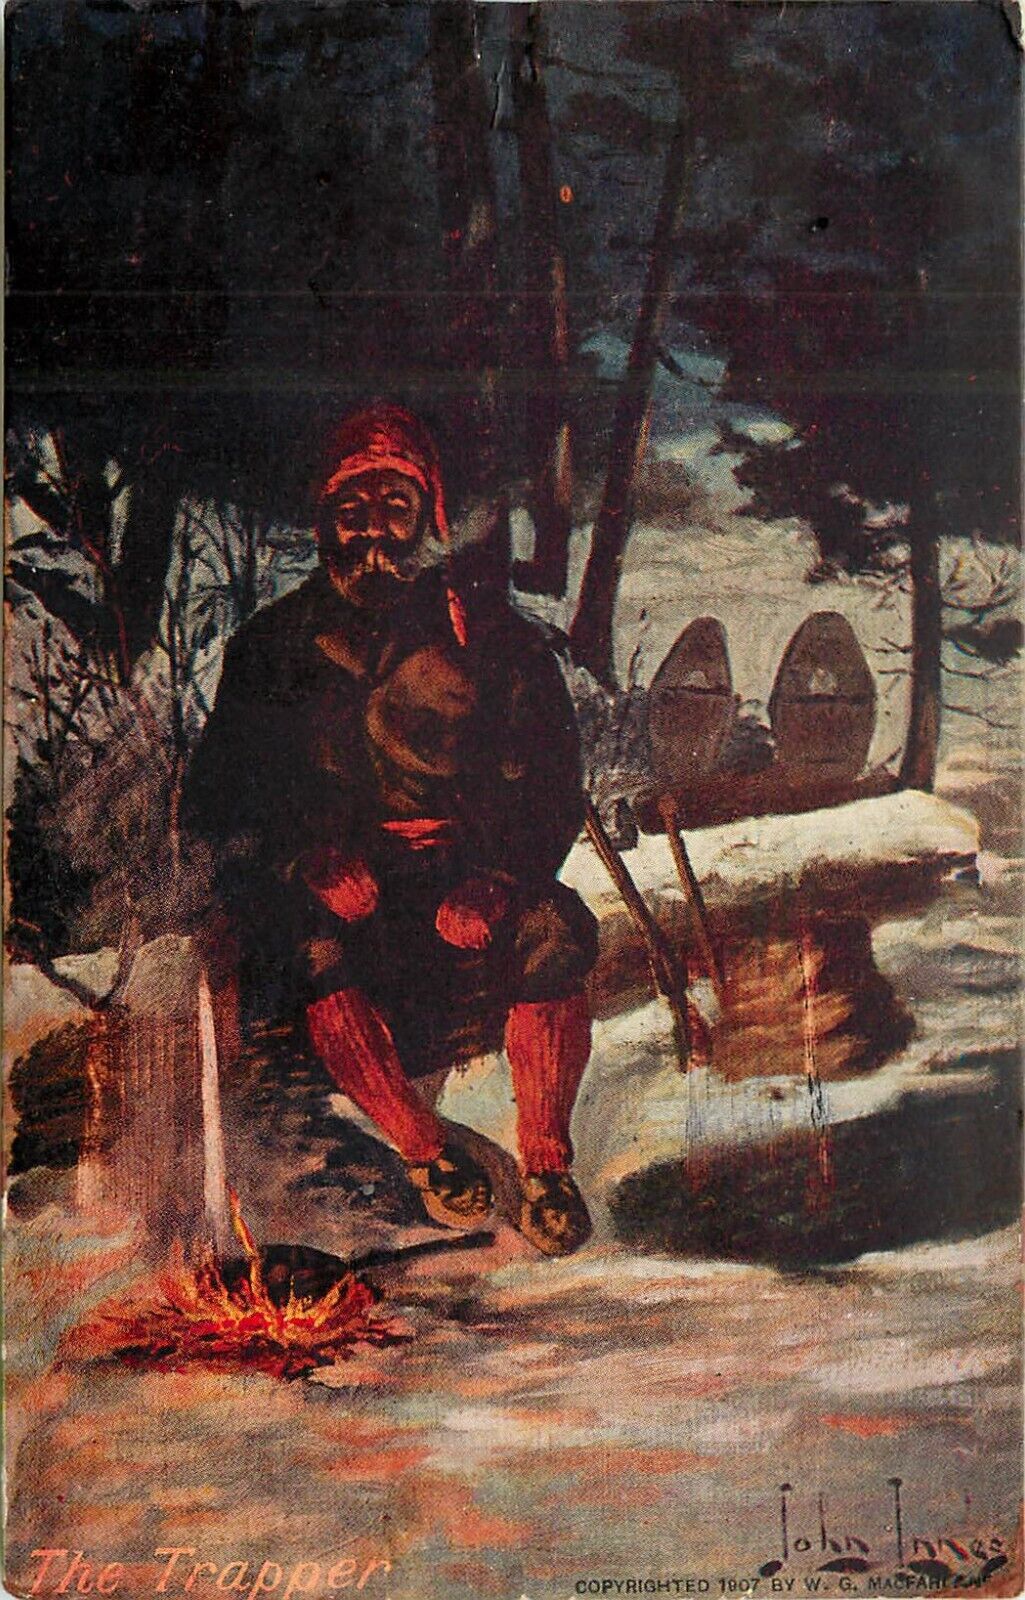 The Trapper S/A Postcard John Innes Troilene Western Series Snowshoes Campfire